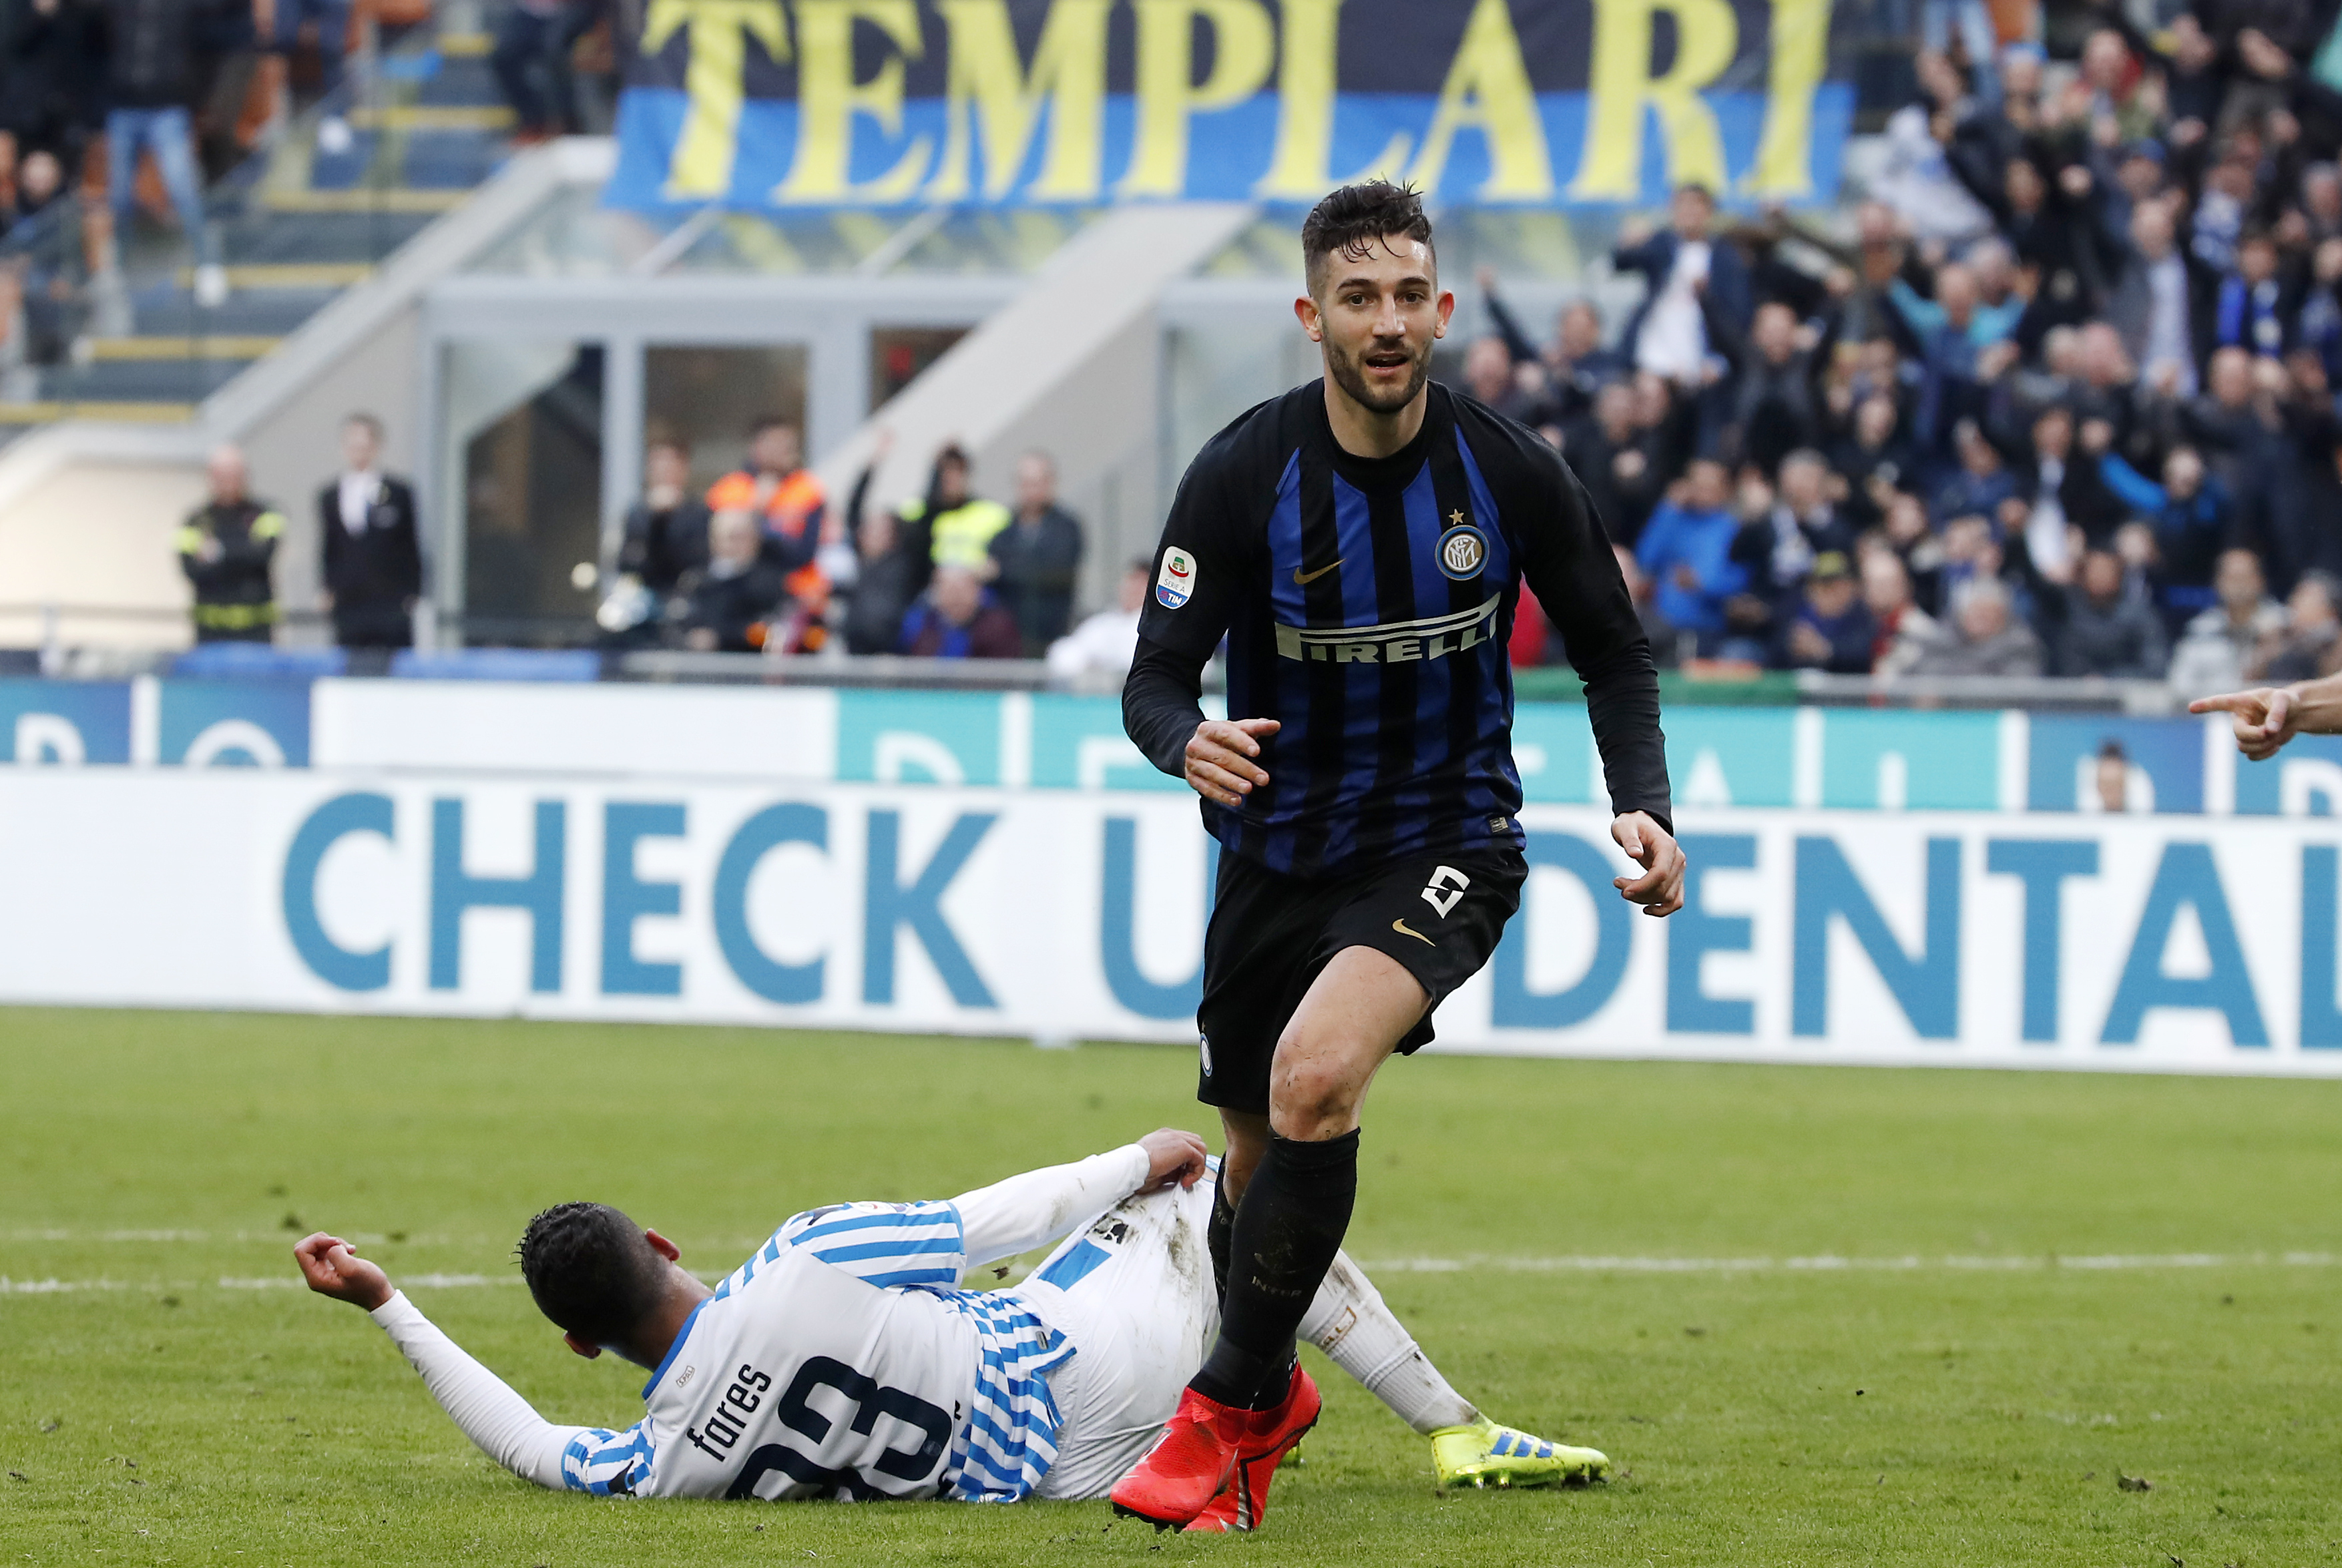 Inter beats Spal 2-0 to stay close to Milan ahead of derby